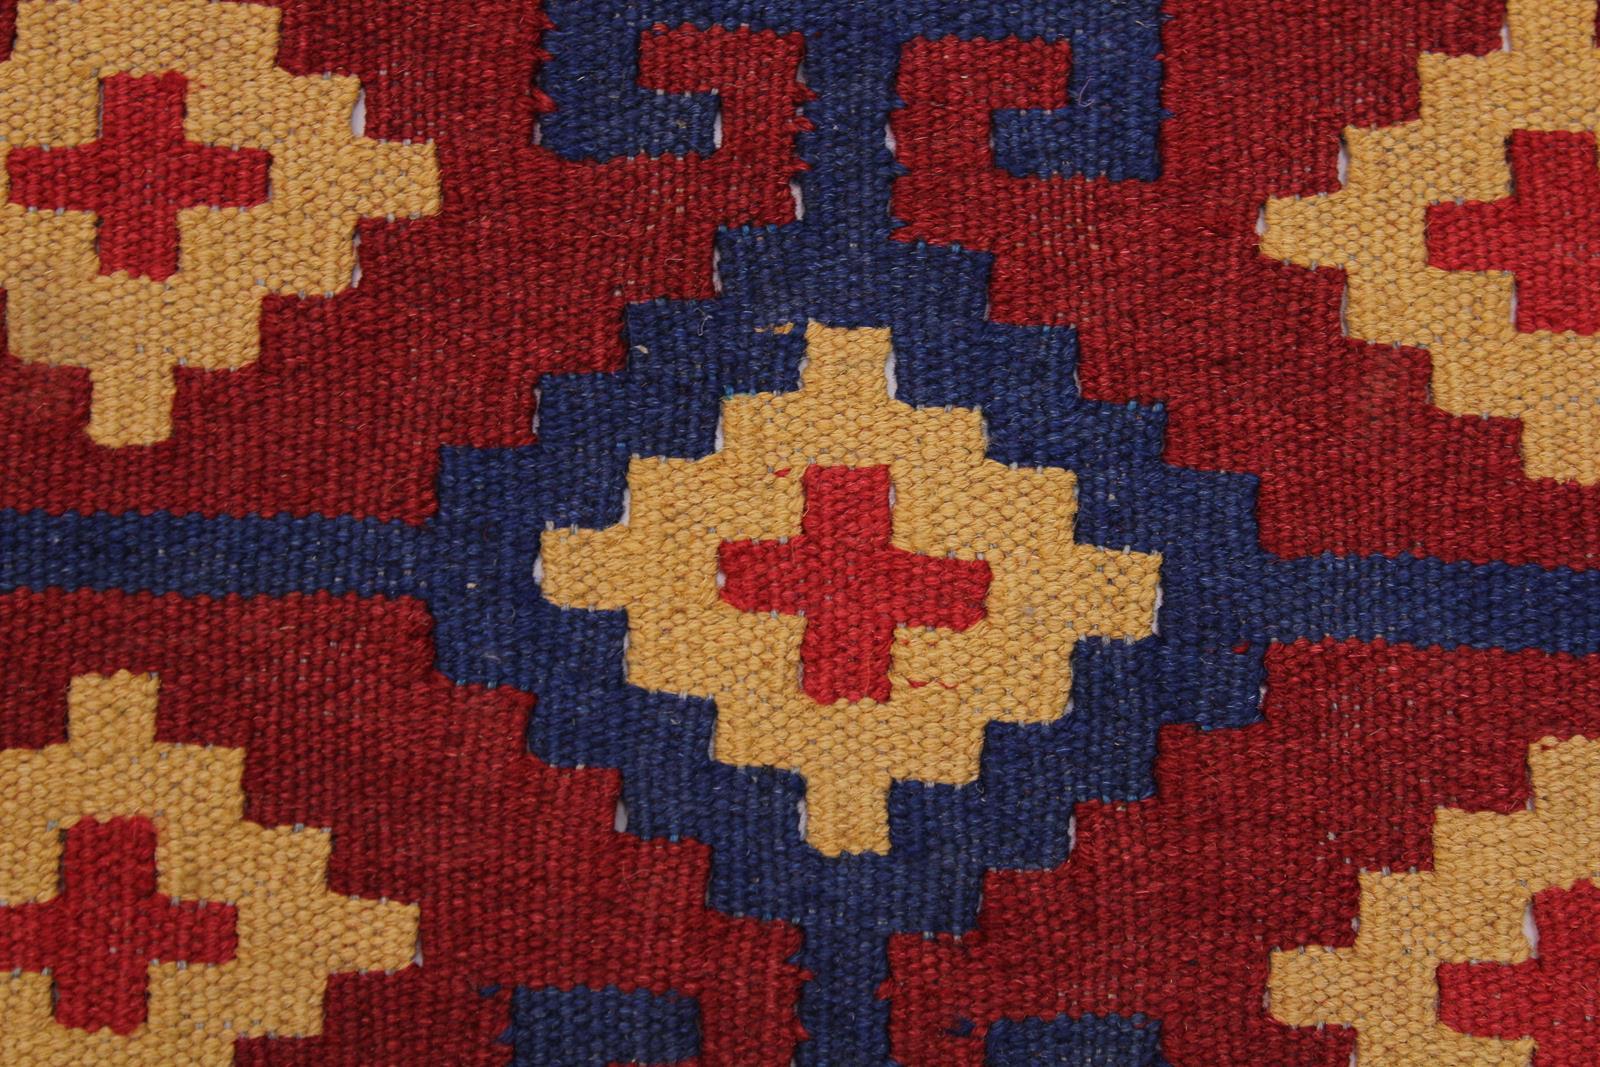 A10652, 411"x 610",Geometric                     ,5x7,Red,BLUE,Hand-woven                    ,Afghanistan,100% Wool  ,Rectangle  ,652671197697